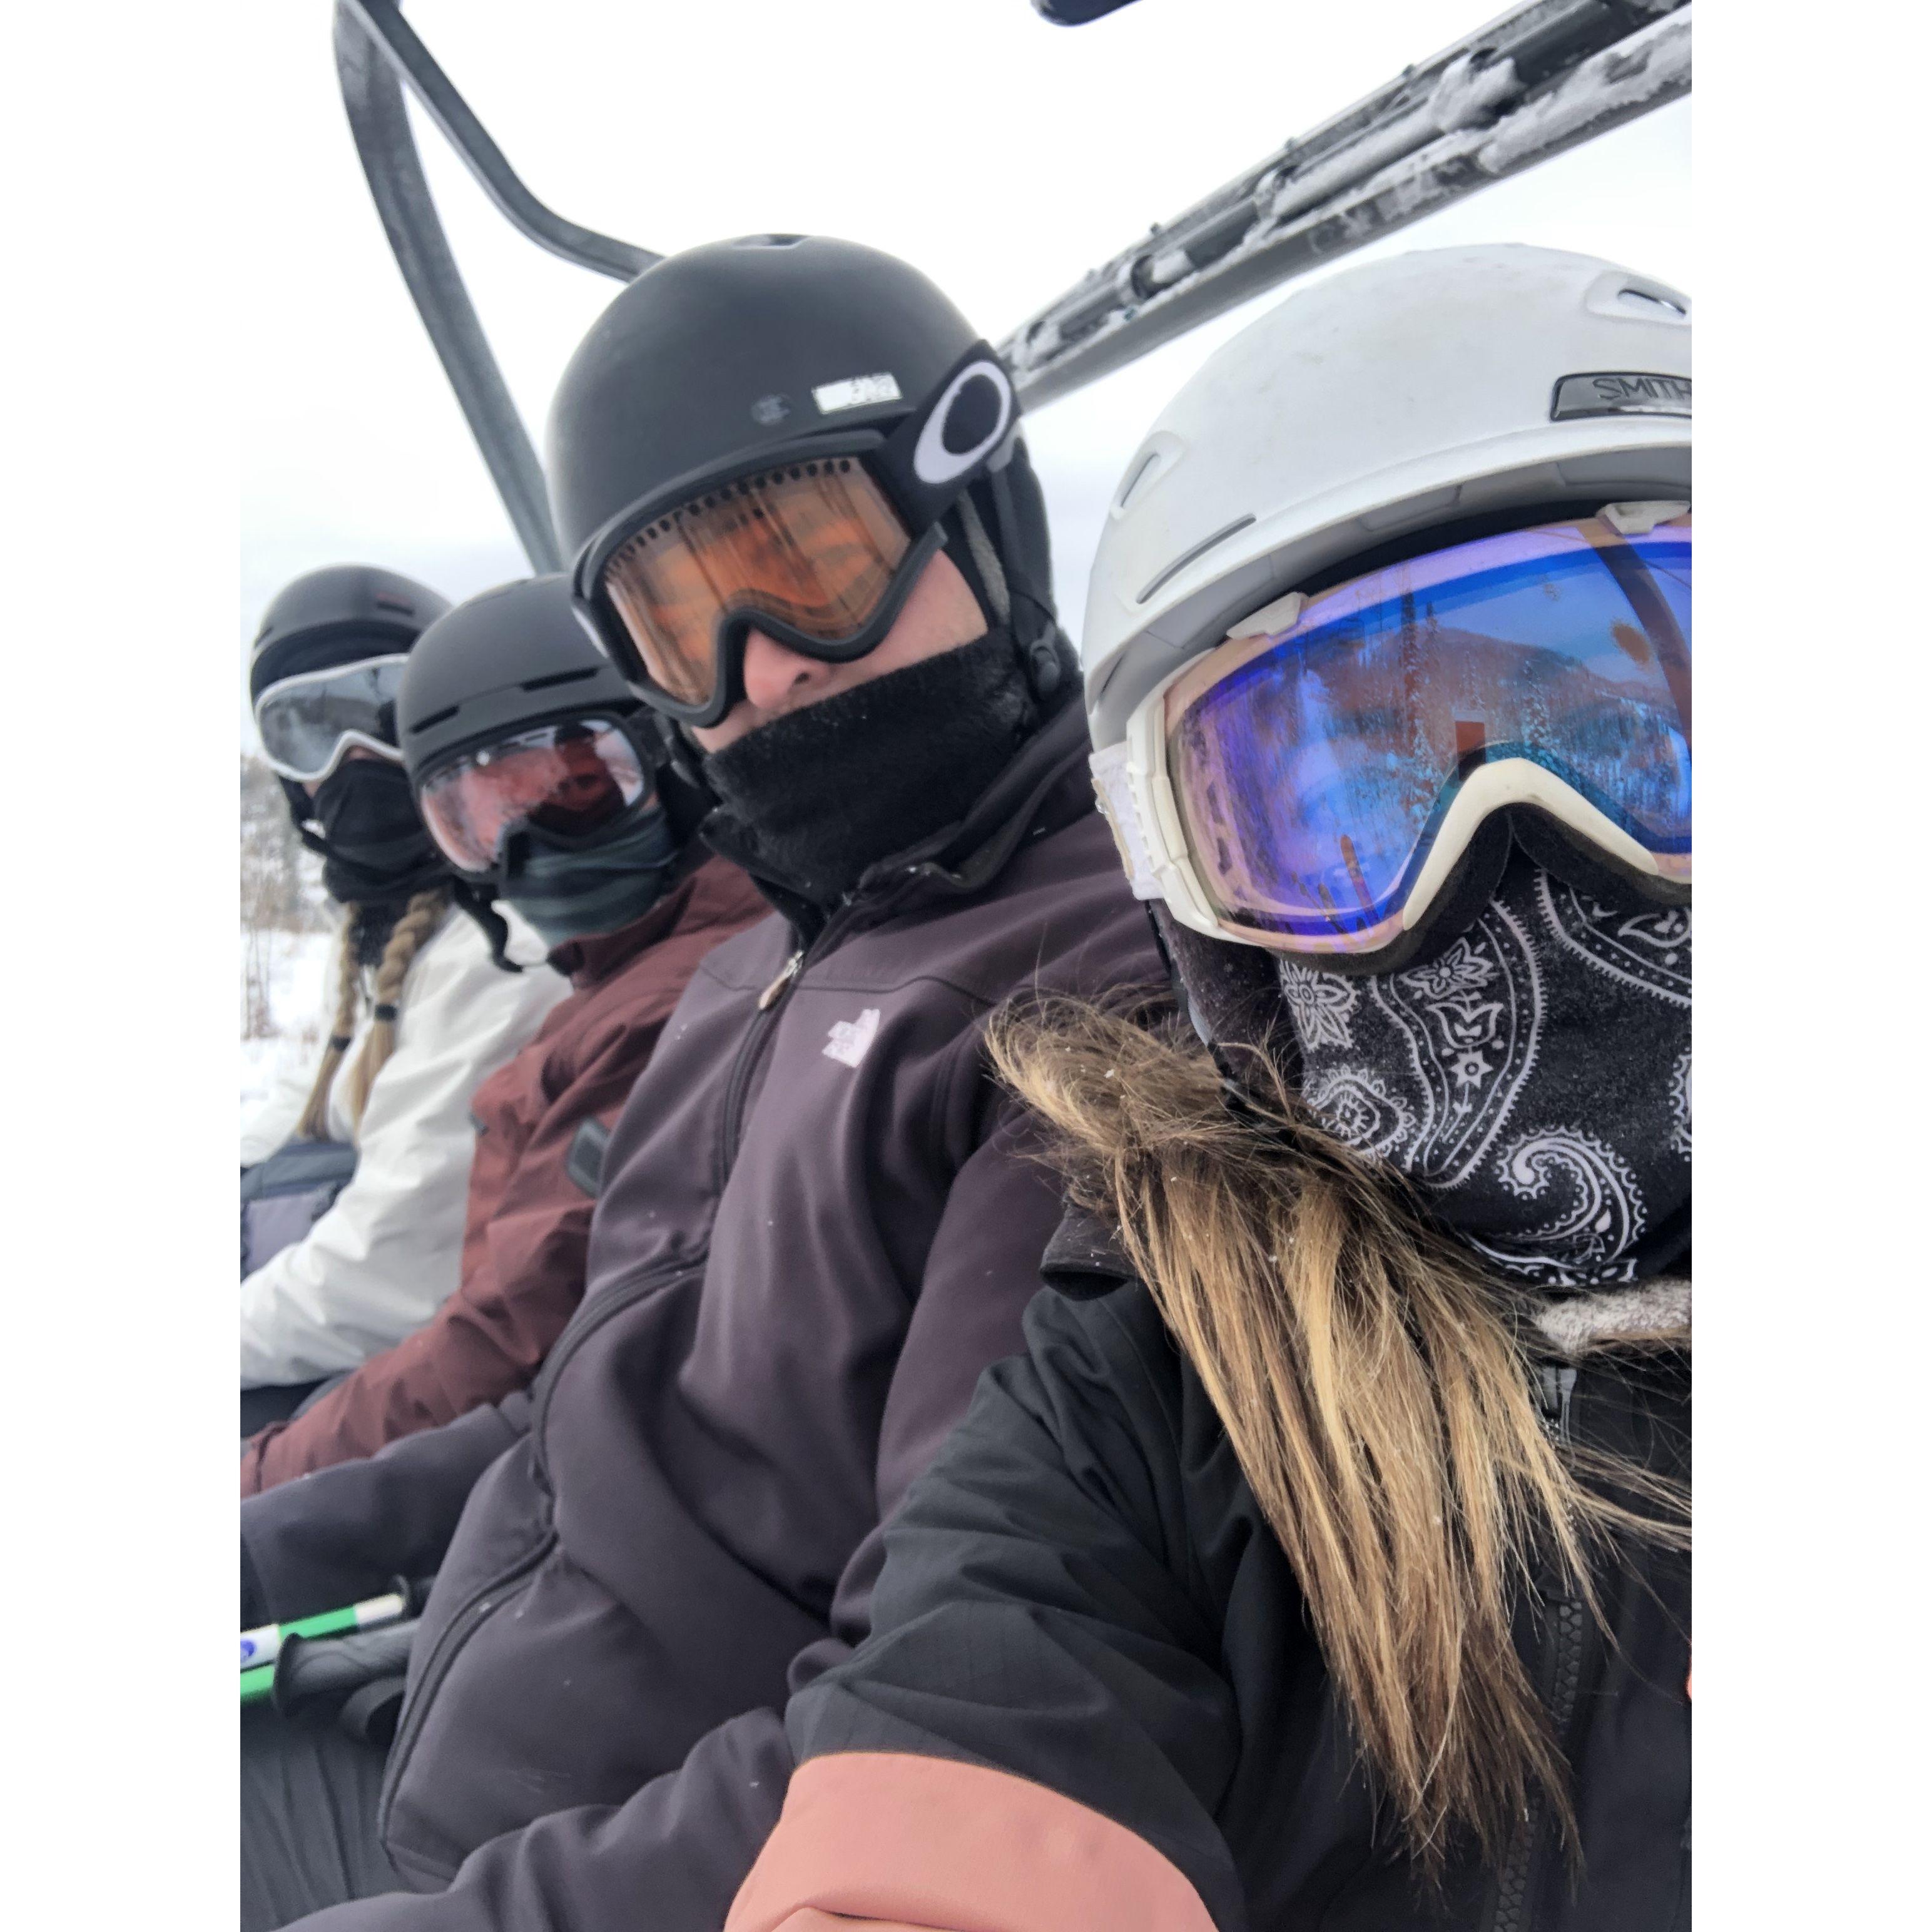 A & A go to Steamboat Springs Colorado with Patricia and Kyle. Kyle proposes to Patricia! December 2020